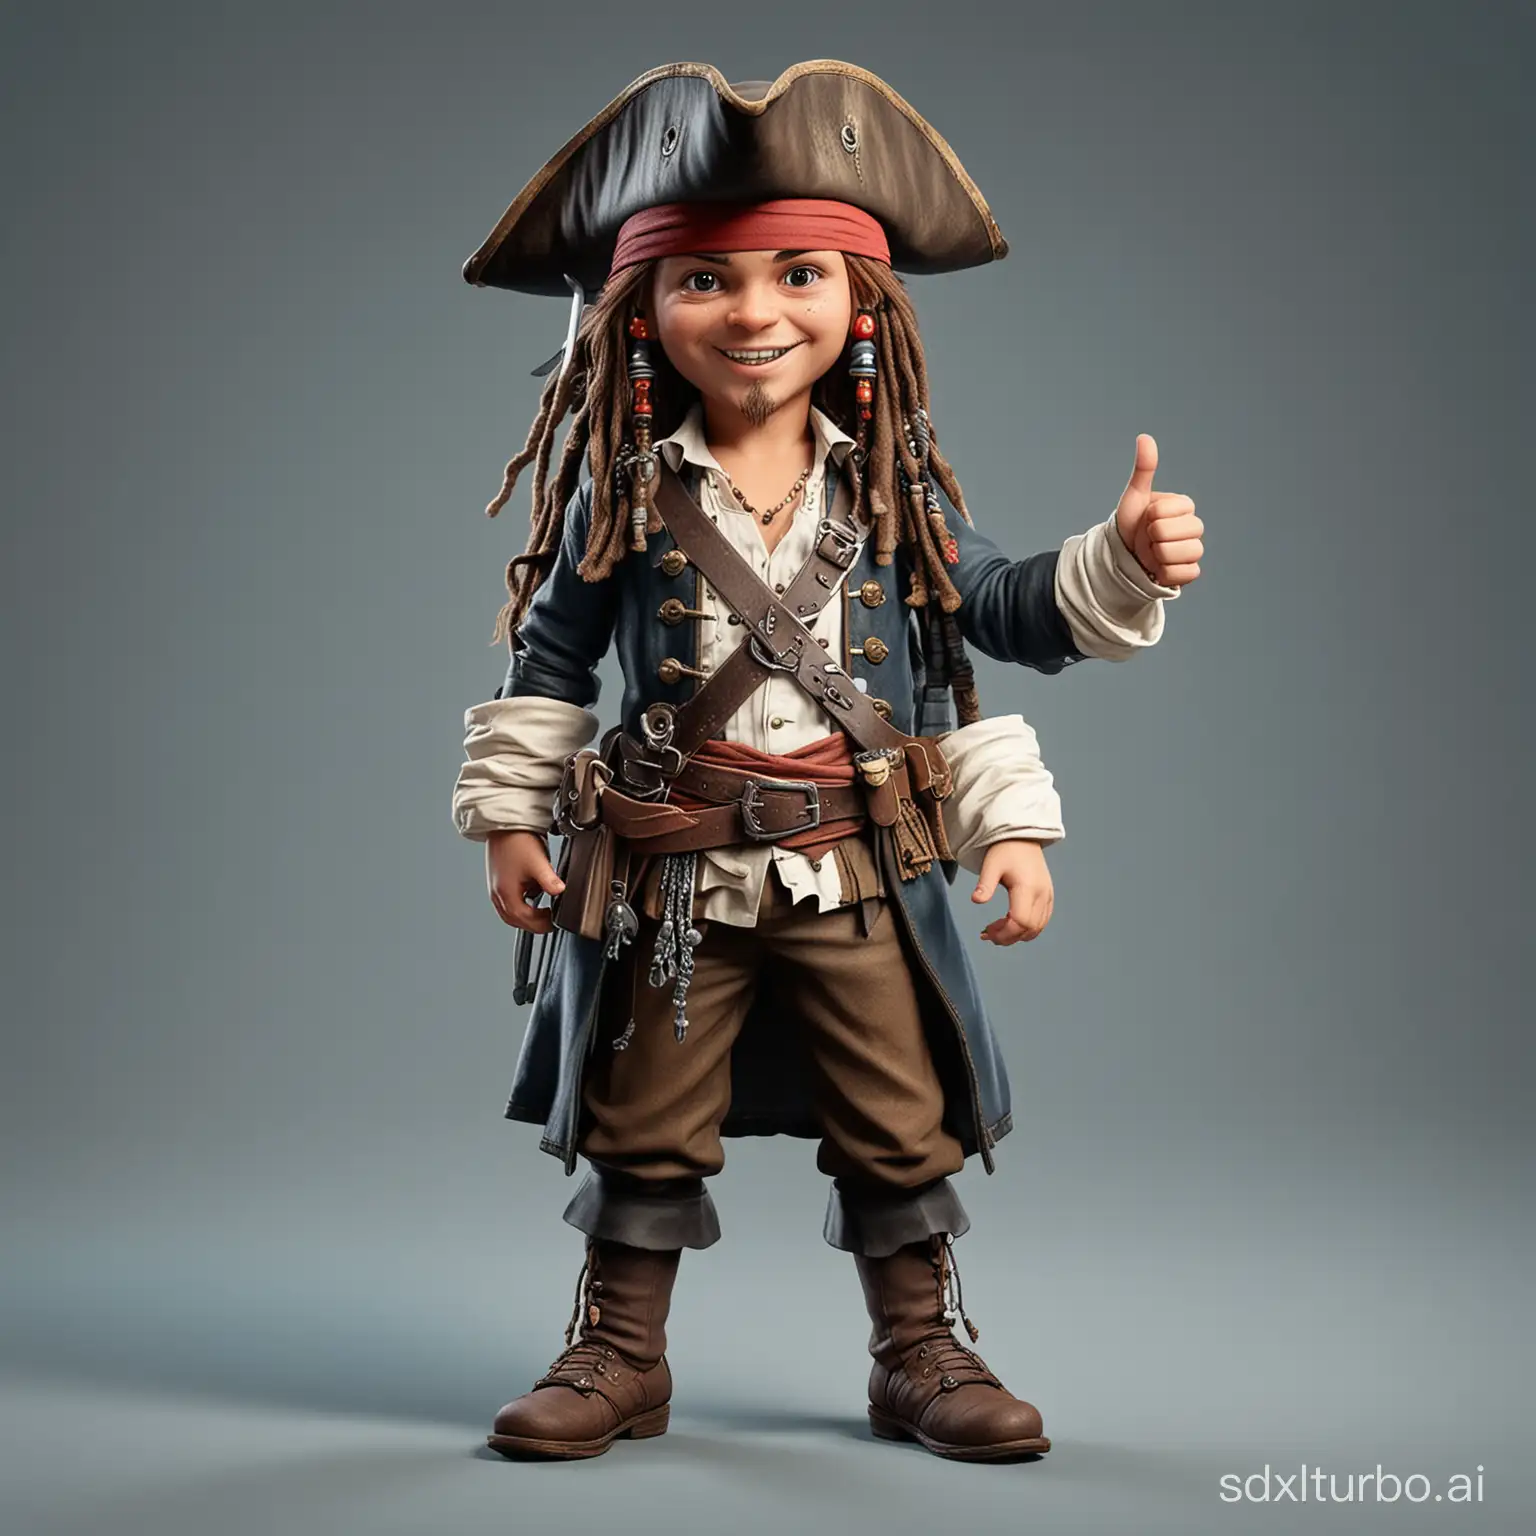 Little child captain jack sparrow with thumbs up pose, game character, stands at full height